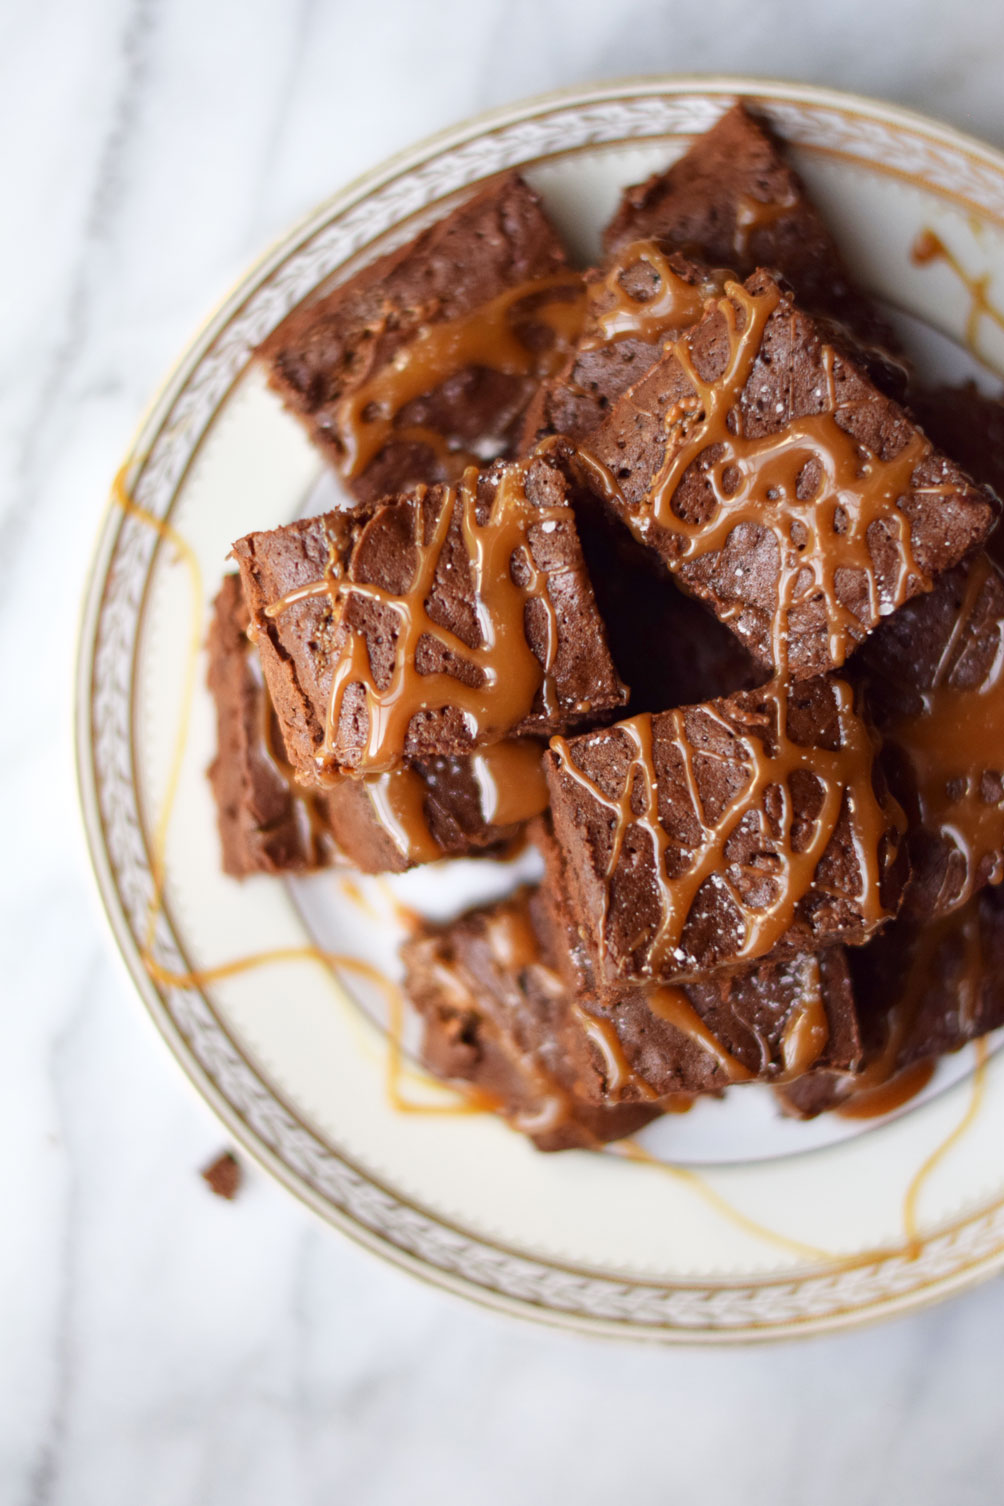 salted caramel nutella brownies are an easy and decadent chocolate dessert recipe from Leslie Musser of one brass fox